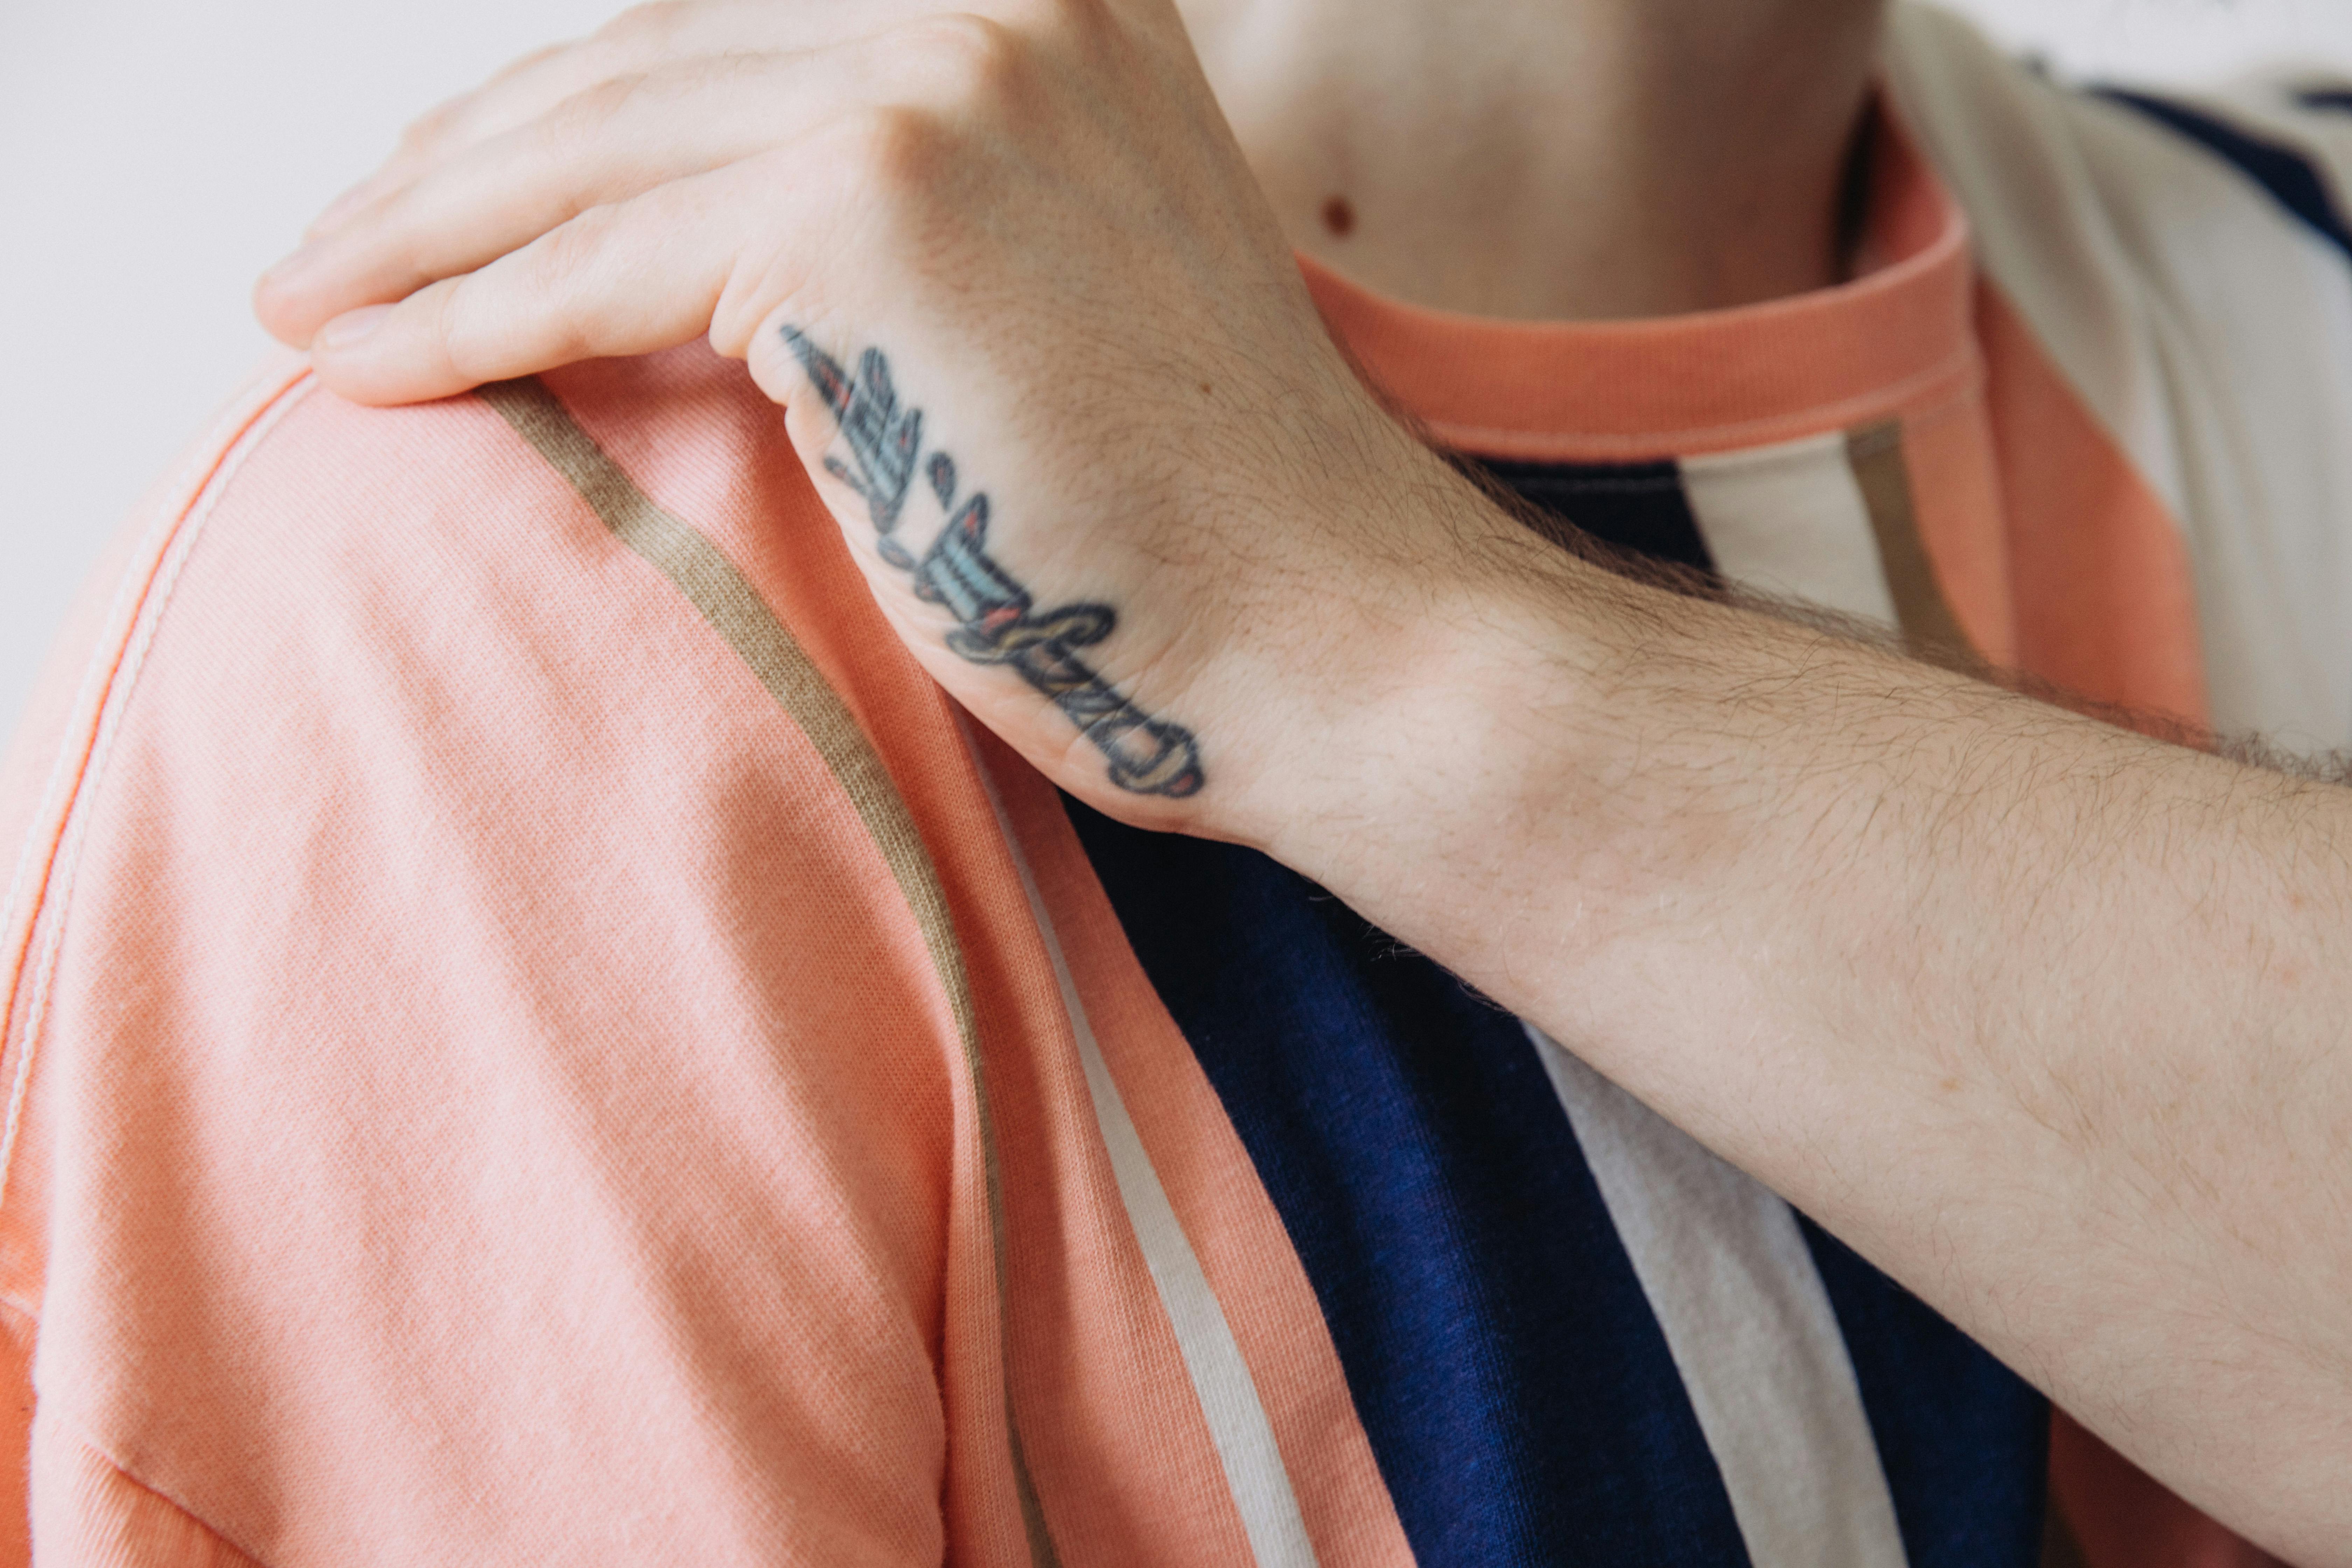 Person with tattoo on left hand photo  Free Arm Image on Unsplash